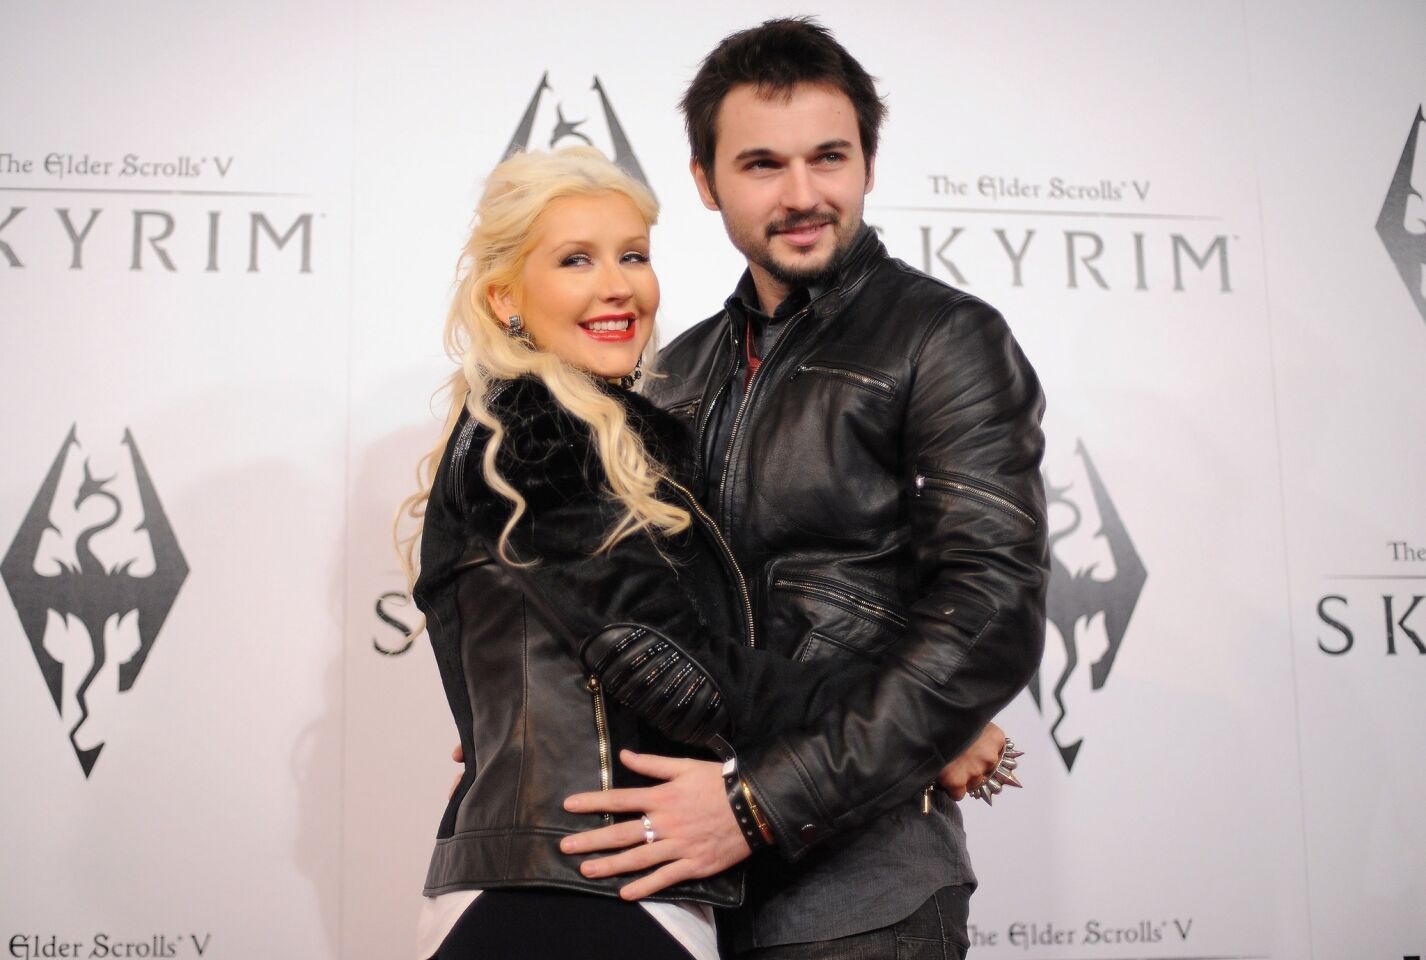 "The Voice" coach/singer announced on Valentine's Day that she and boyfriend Matthew Rutler were engaged. The pair met when Aguilera was making "Burlesque" in 2010 and he was working on the movie as a production assistant.